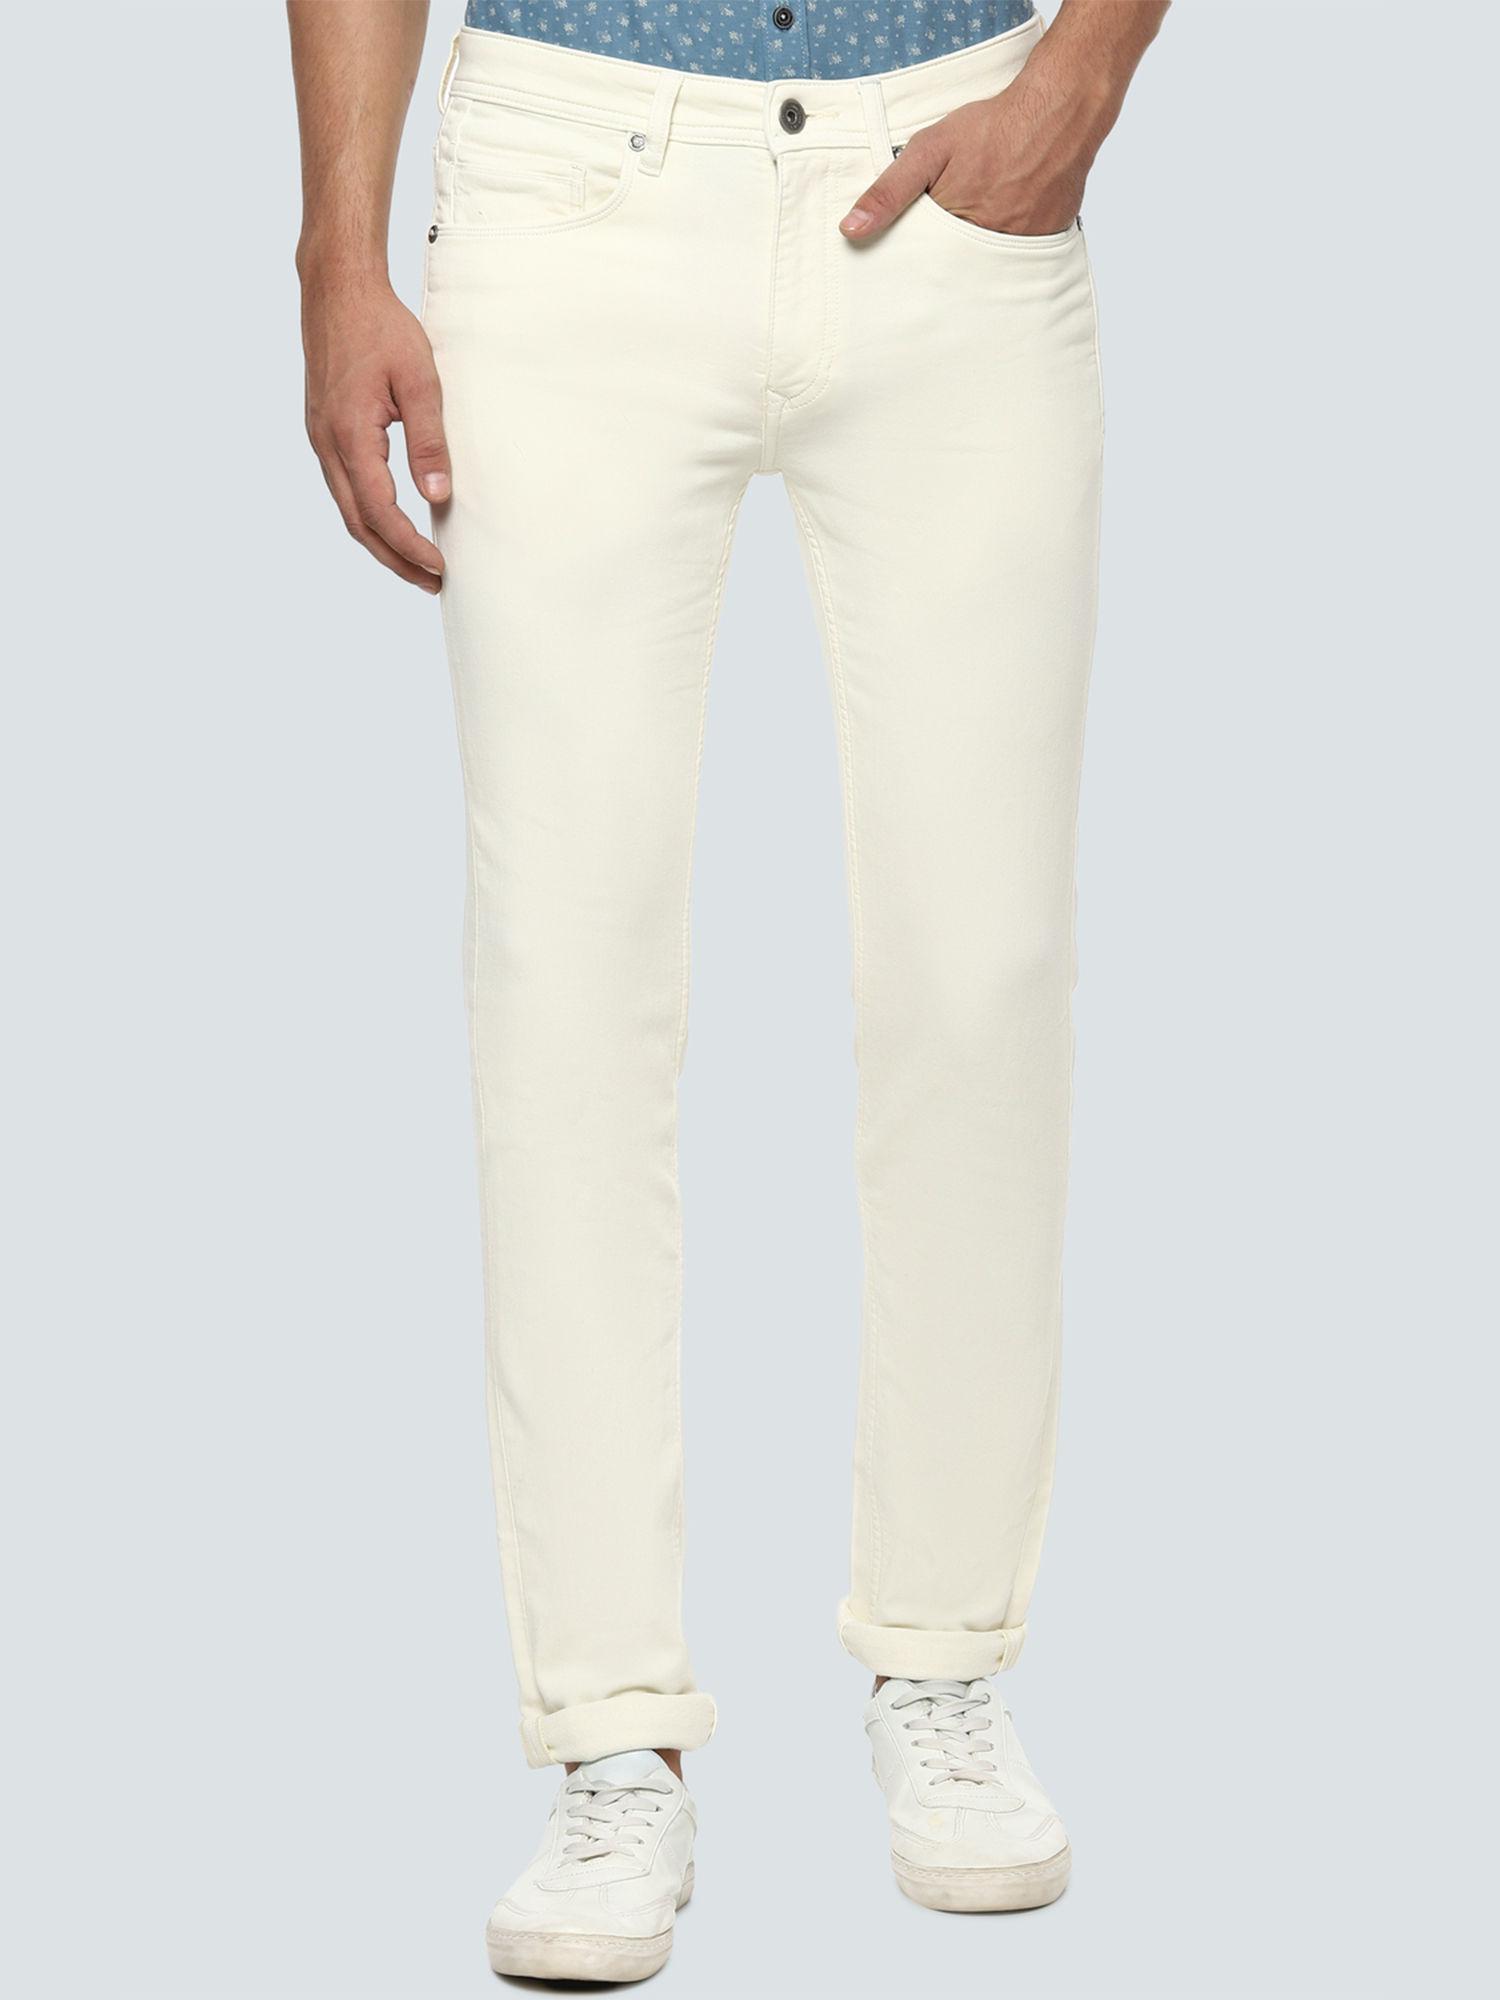 off white jeans